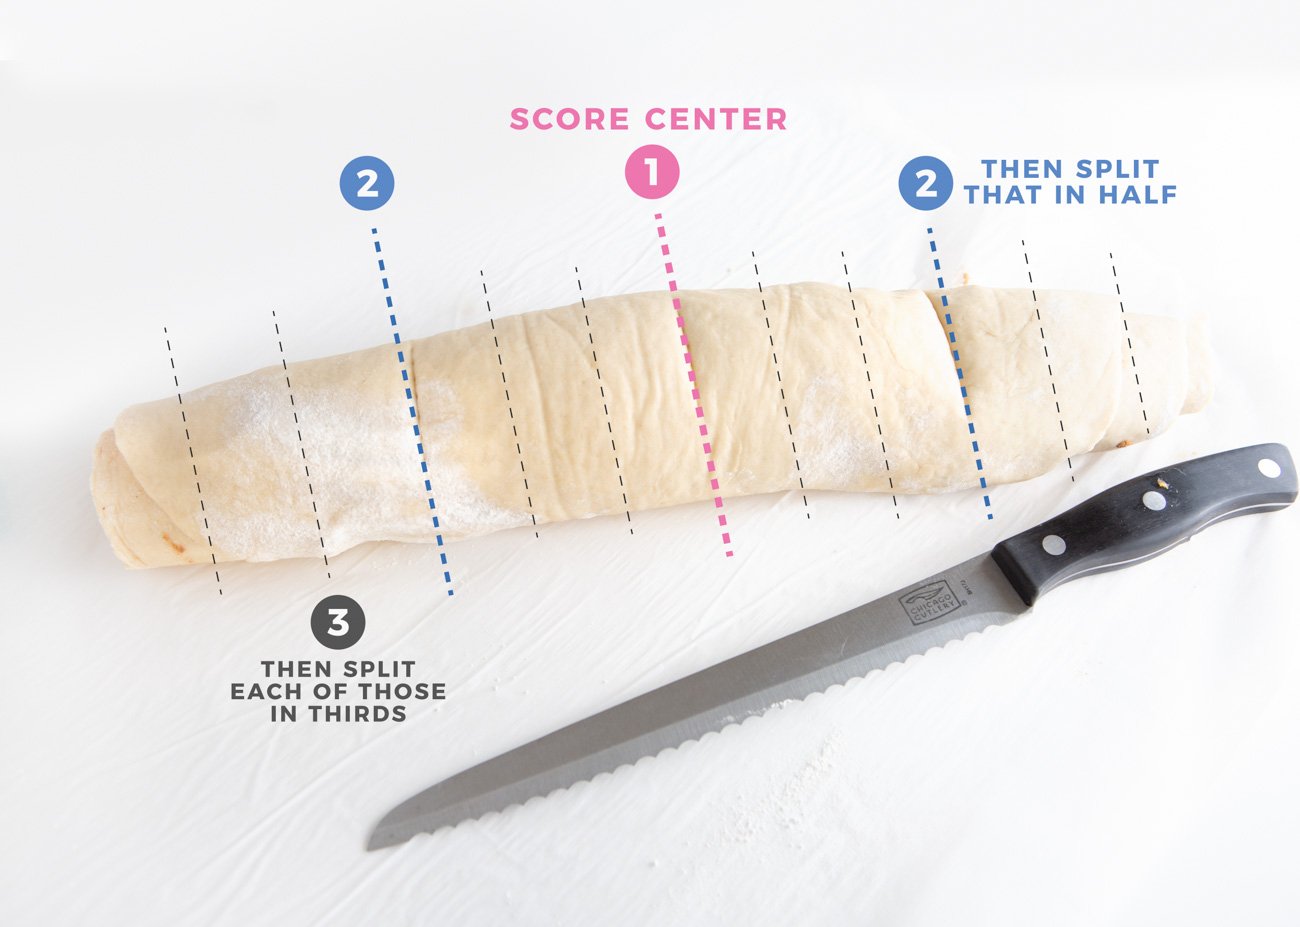 Diagram for cutting cinnamon roll dough into 12 even pieces with serrated edge knife